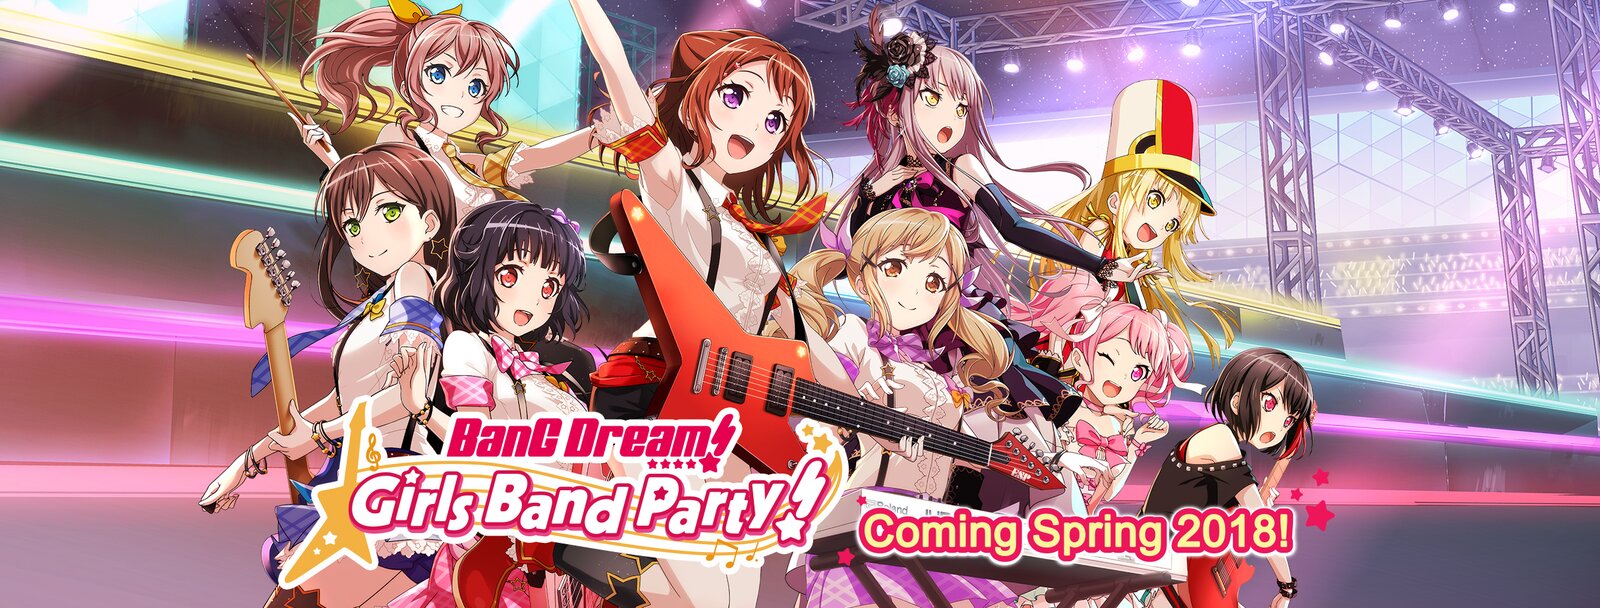 Bang Dream! Girls Band Party! The Review!